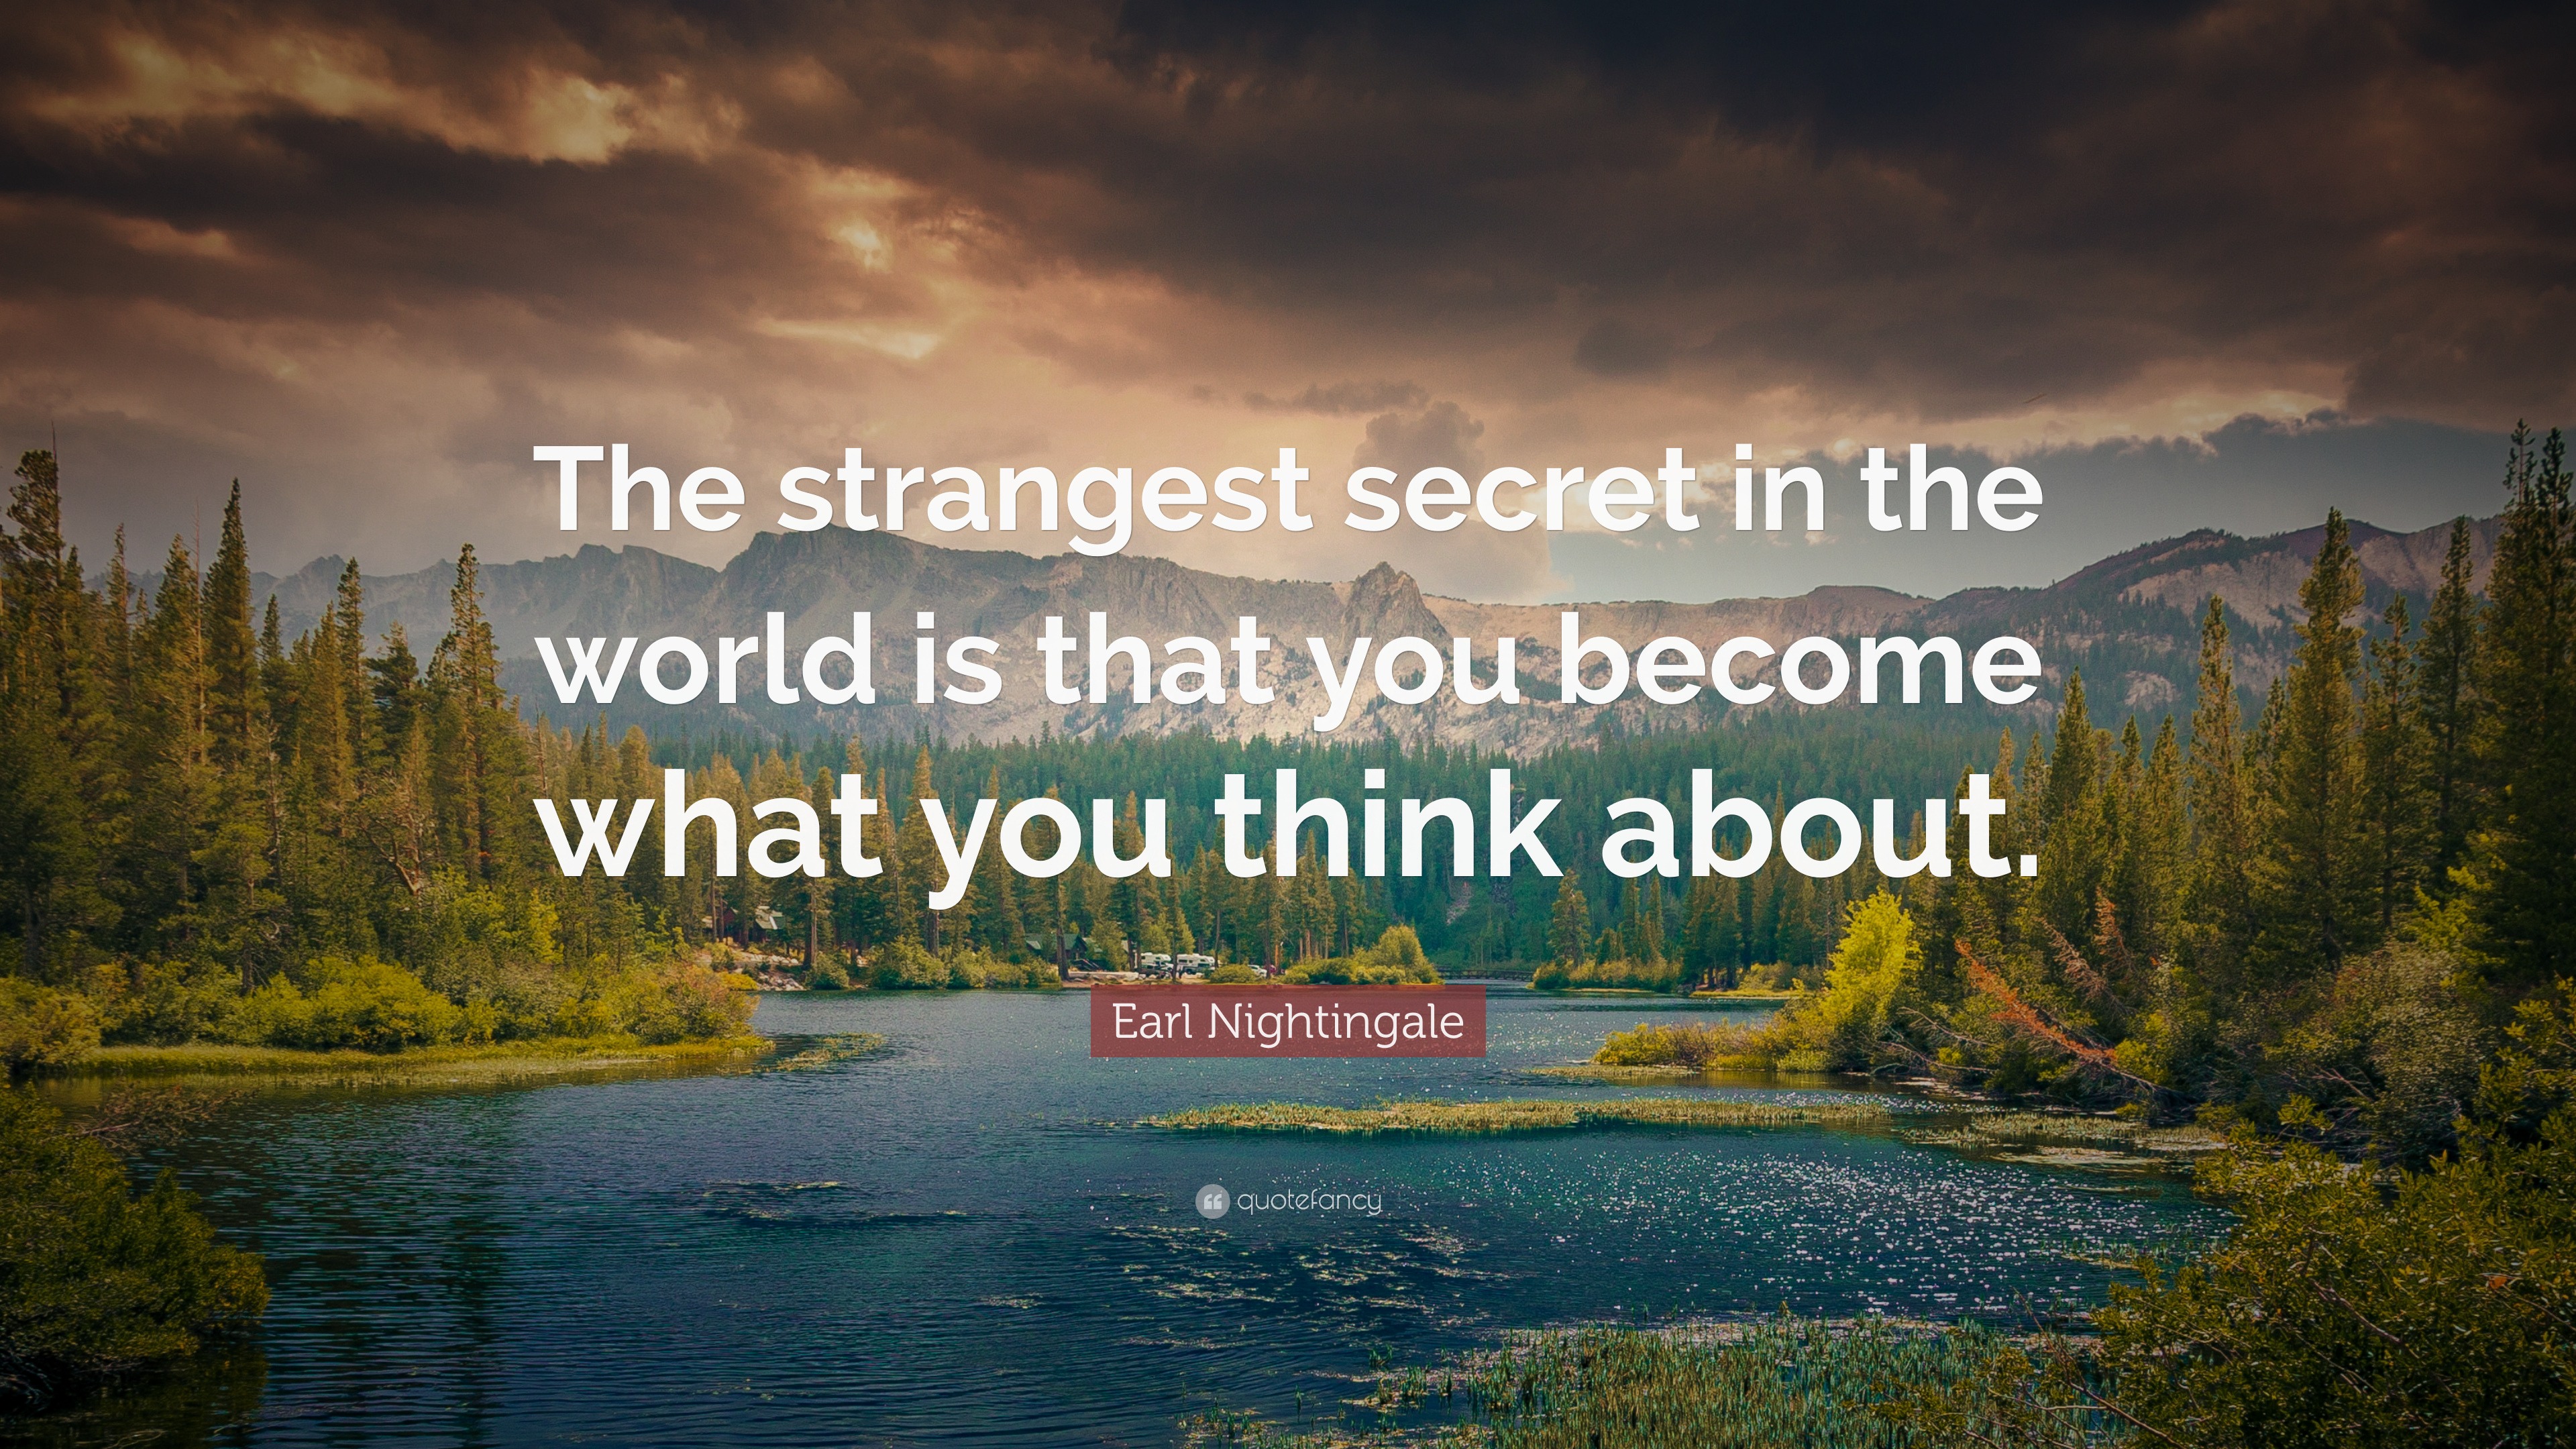 Earl Nightingale Quote: “The strangest secret in the world is that you